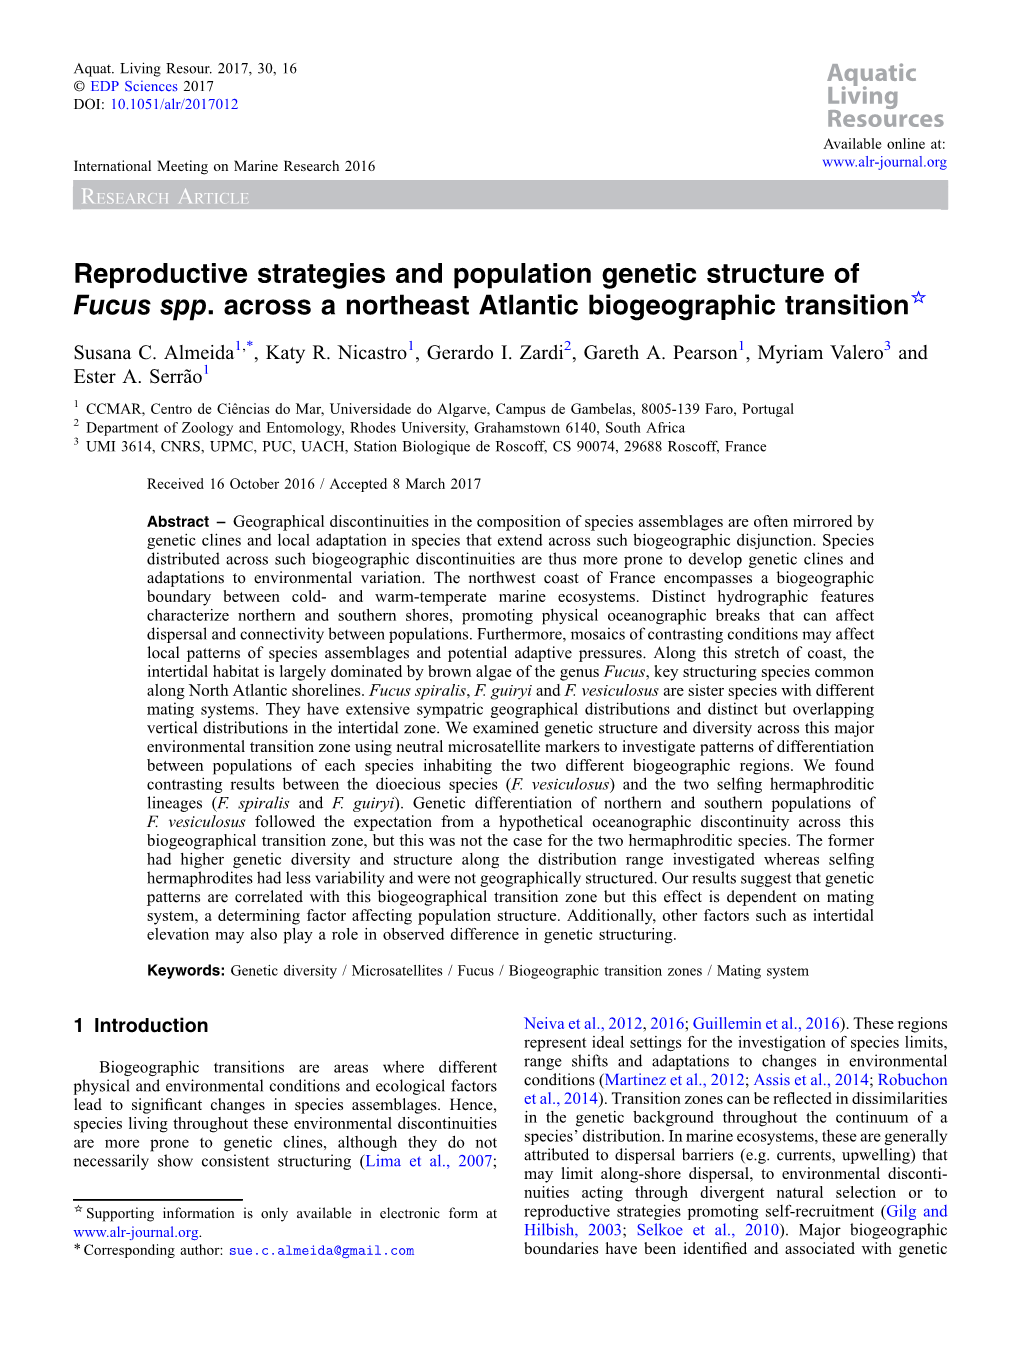 Reproductive Strategies and Population Genetic Structure of Fucus Spp